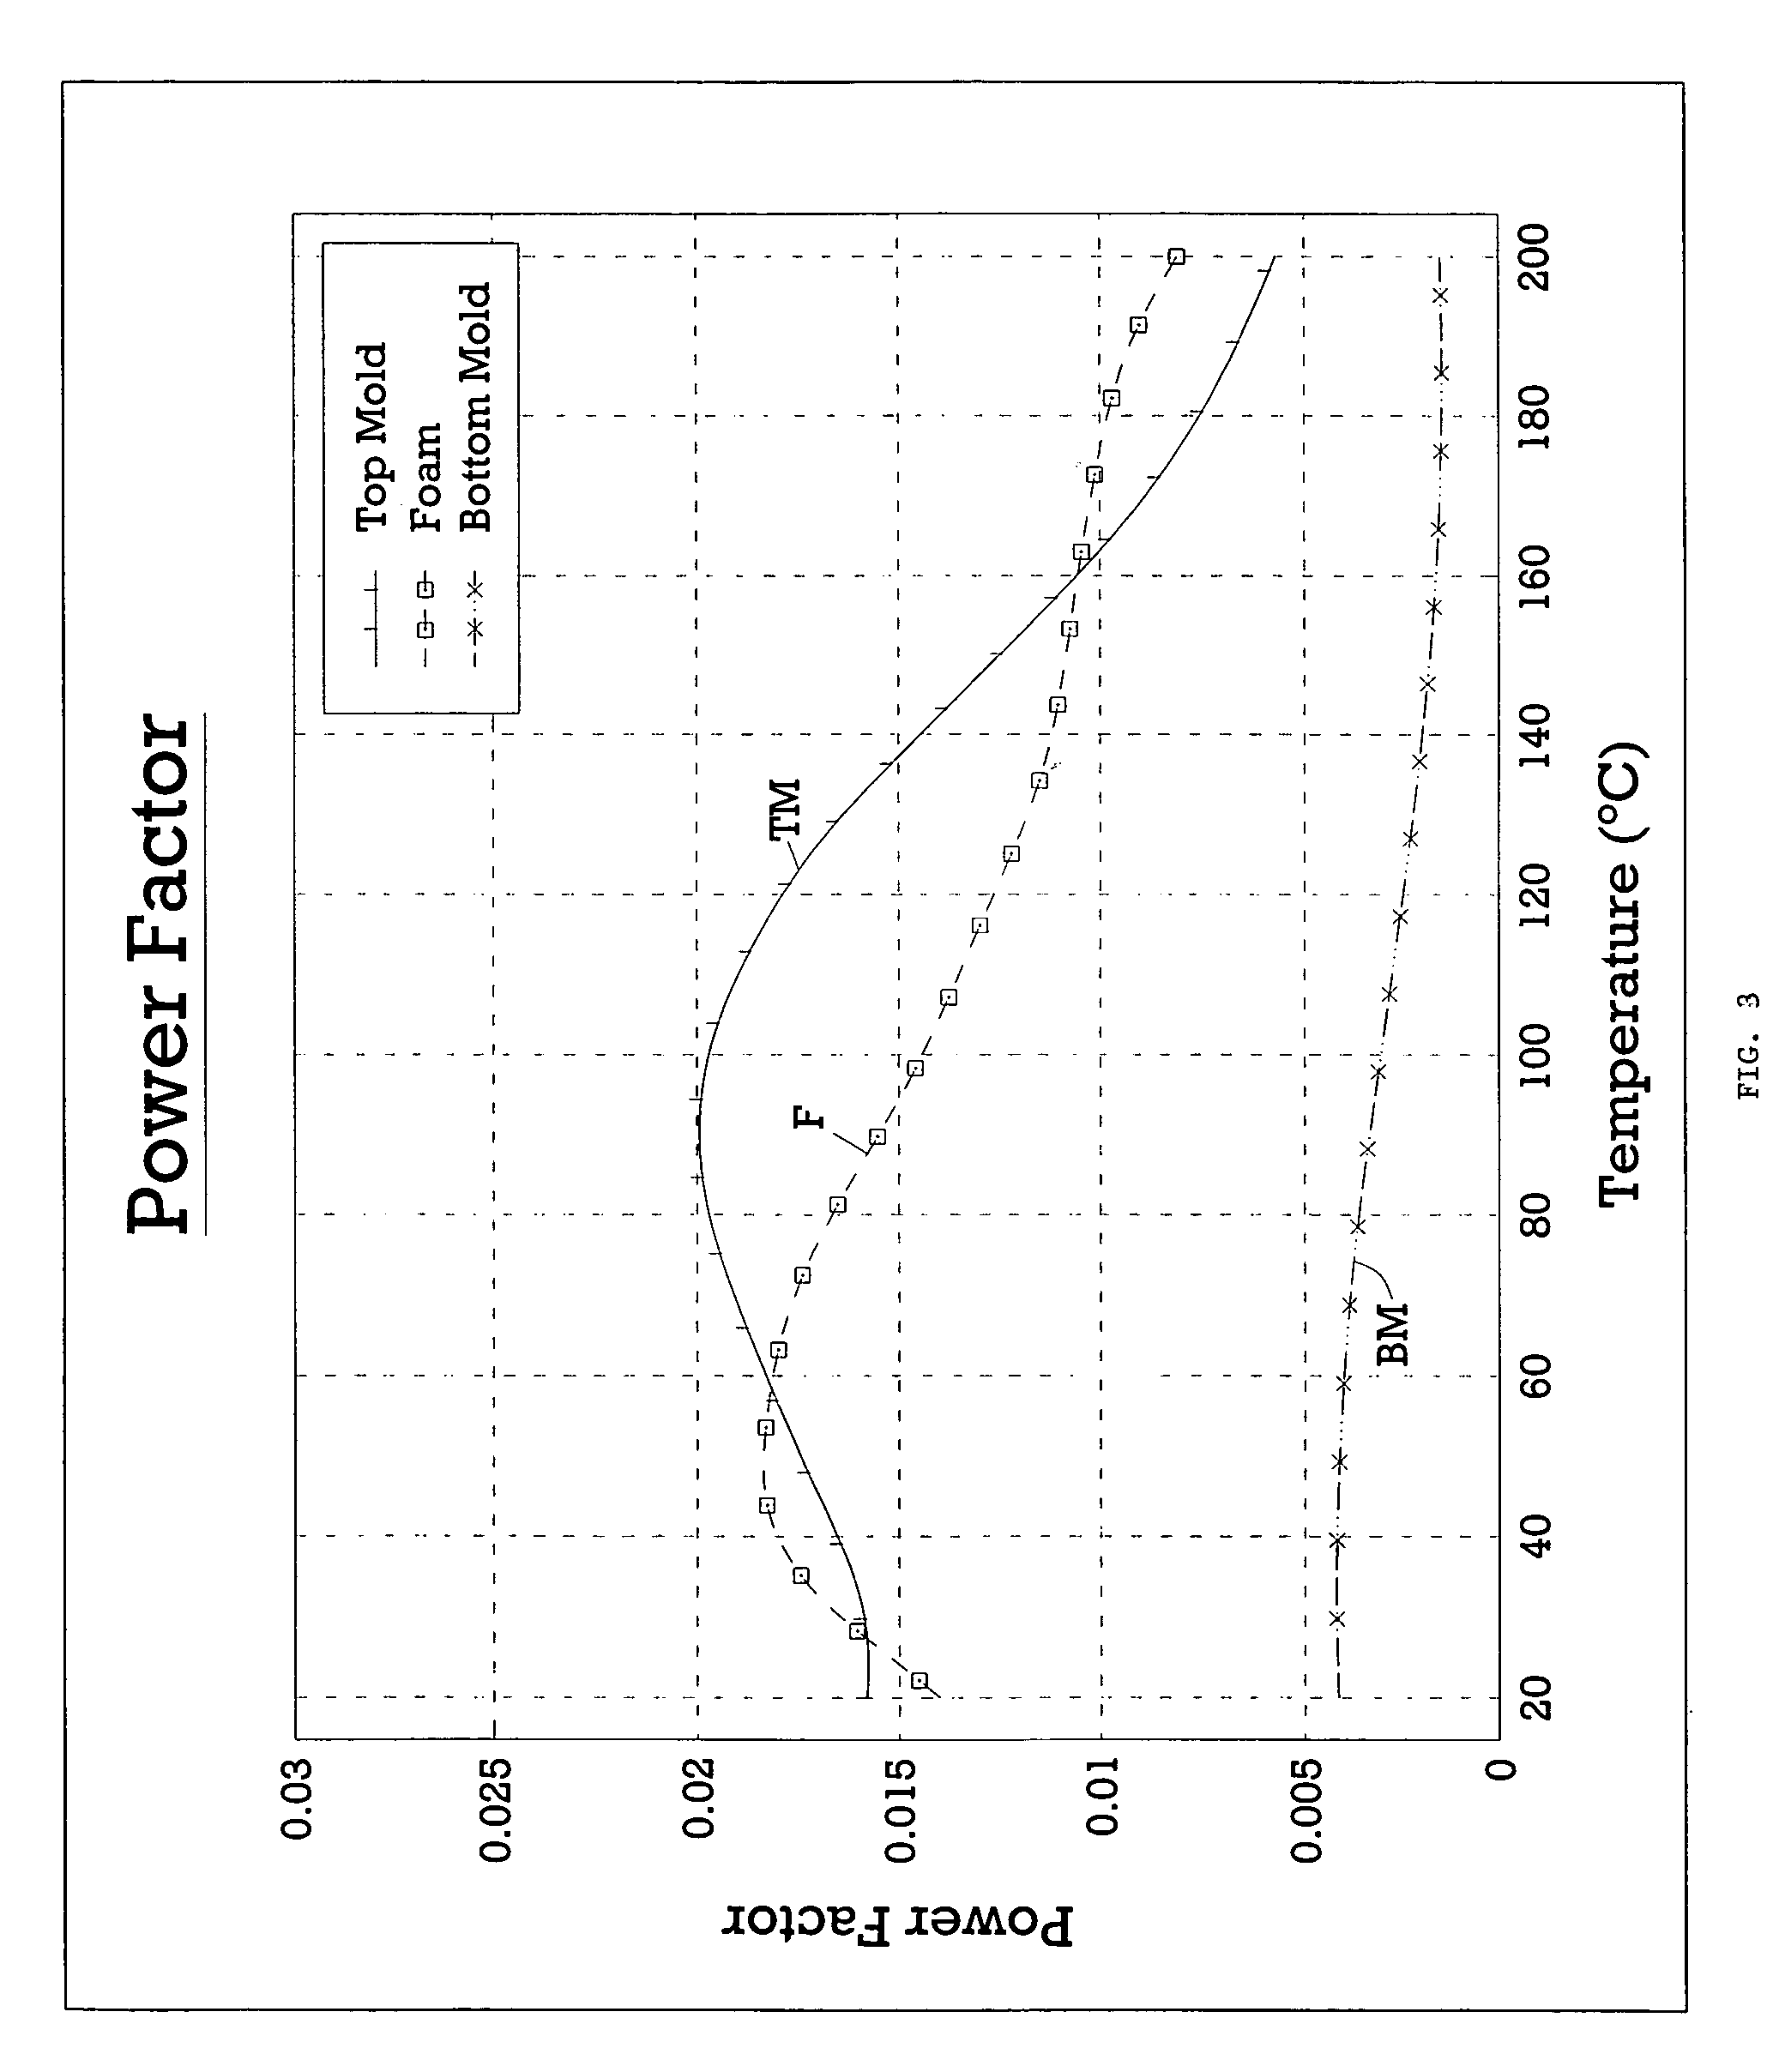 Method of forming a hardened skin on a surface of a molded article